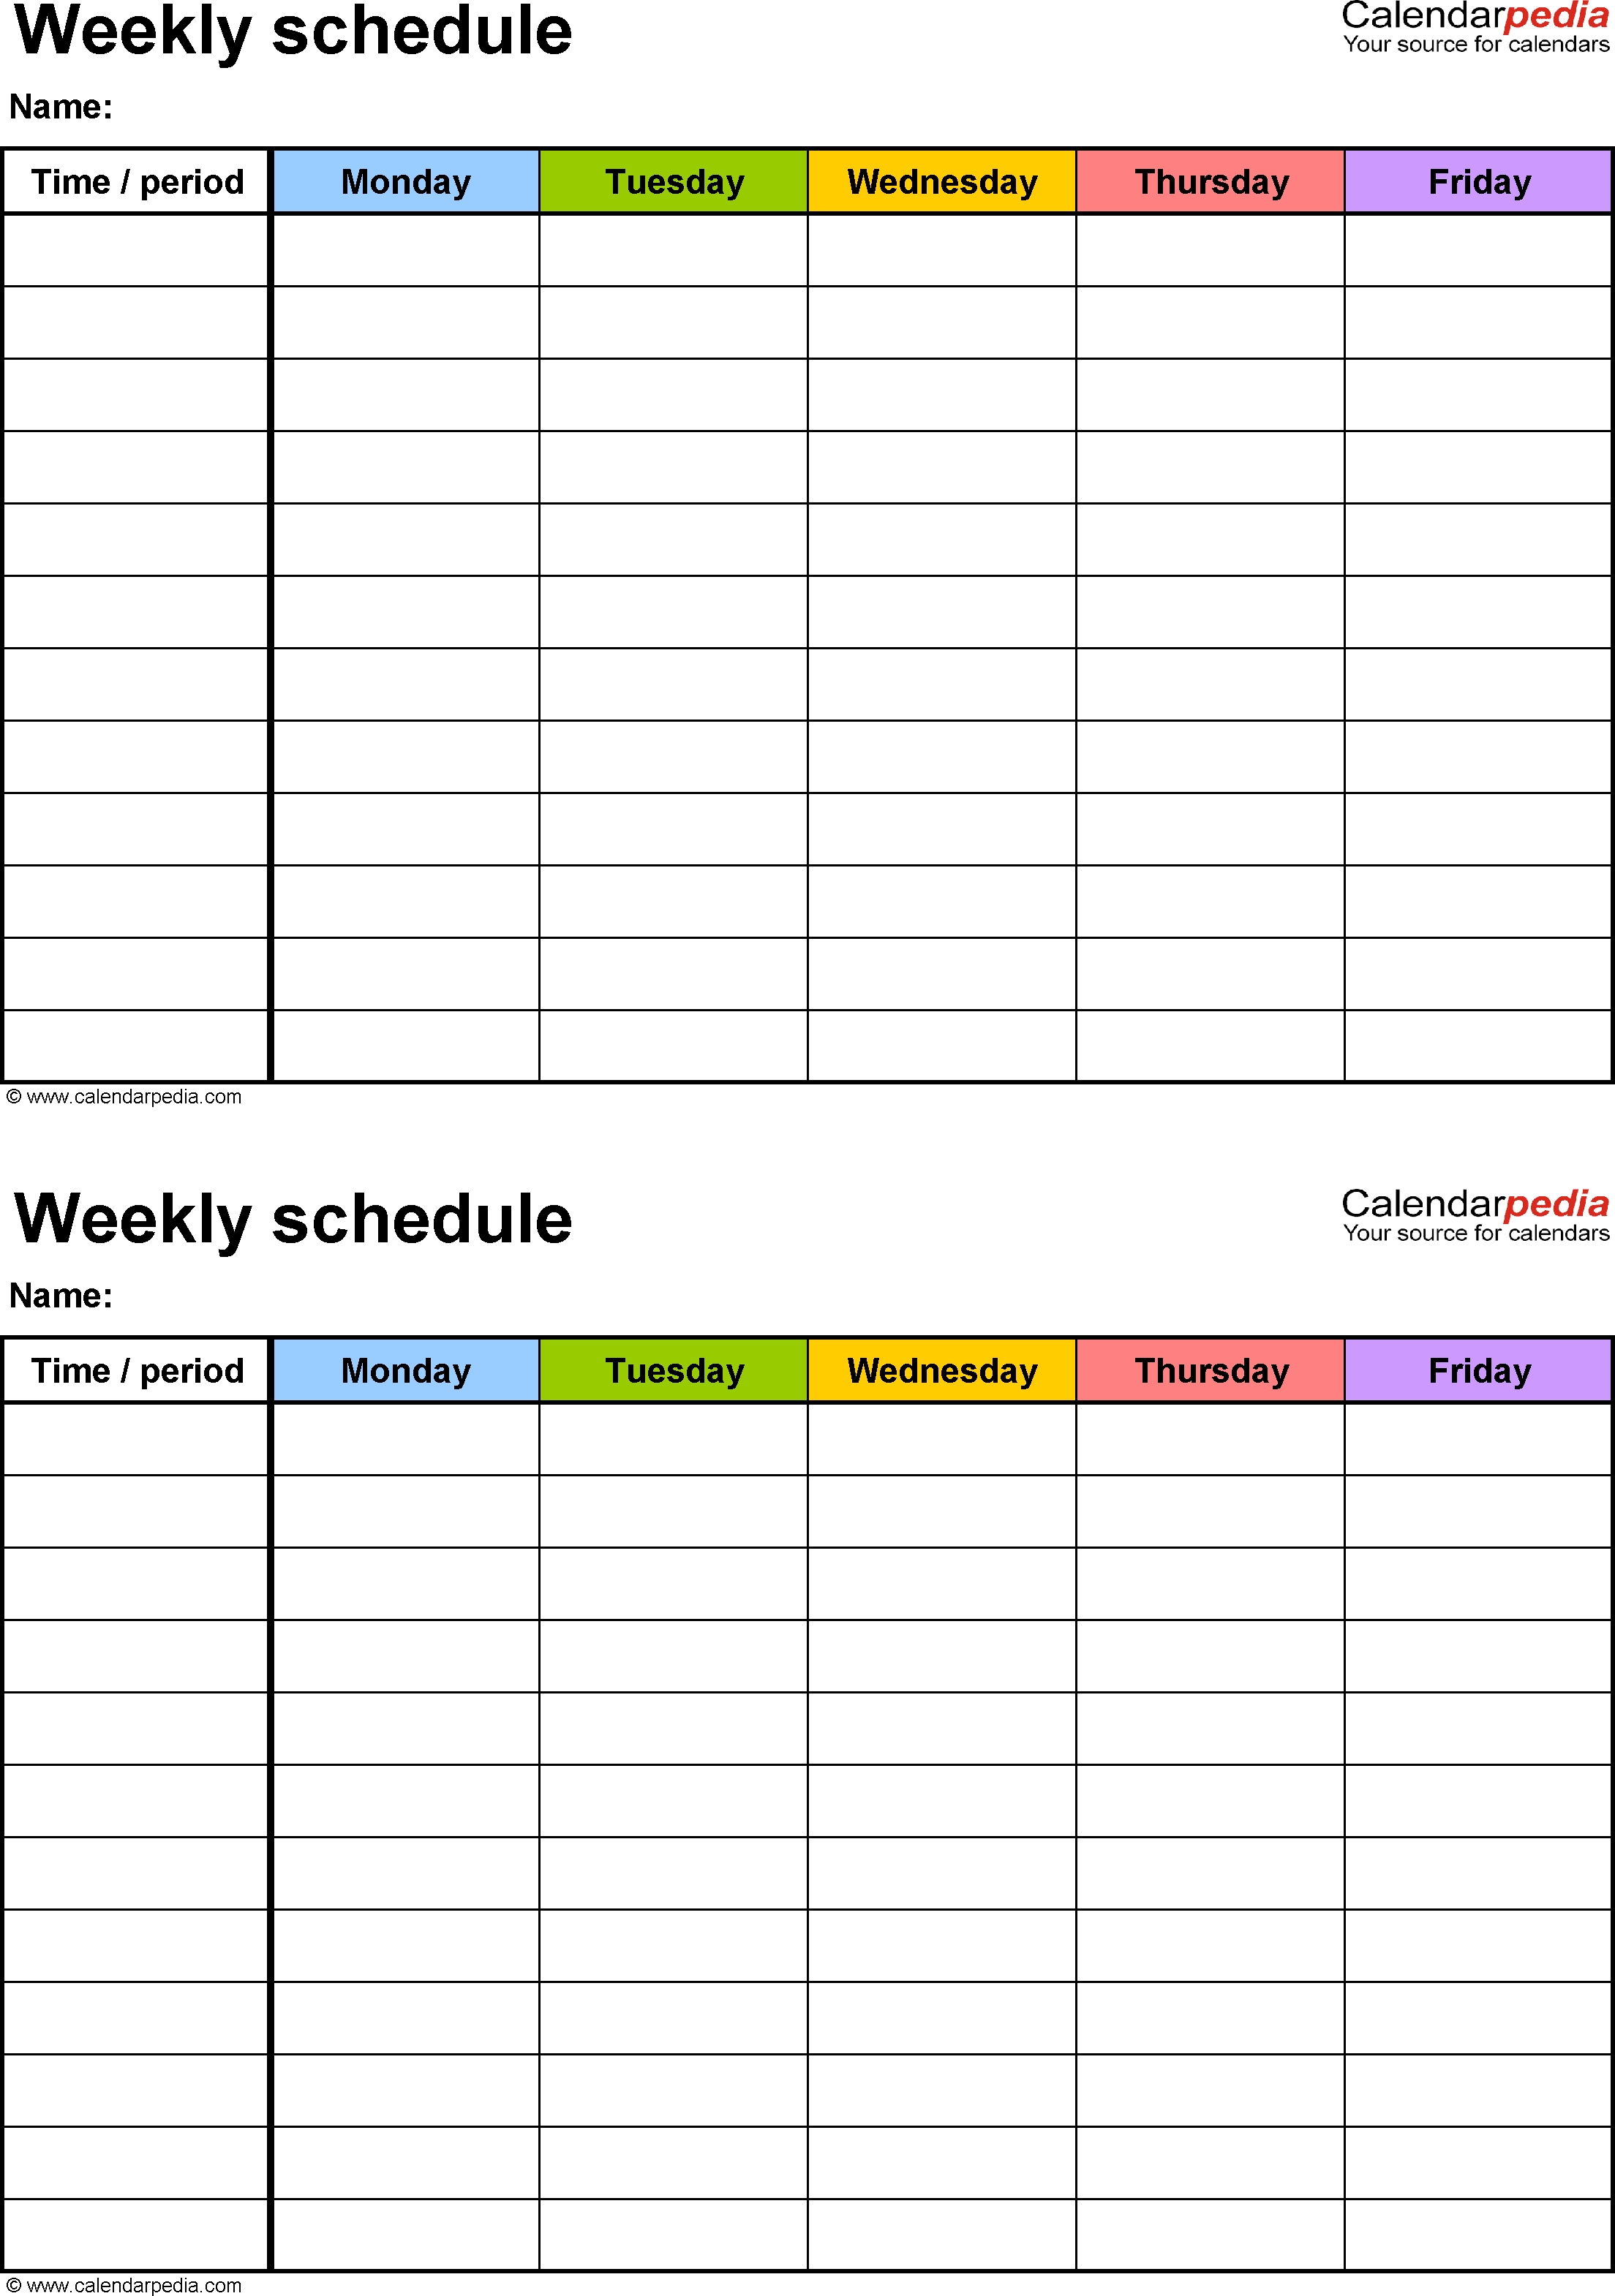 Weekly Schedule Template For Excel Version 3: 2 Schedules On One pertaining to 5 Day Weekly Planner Template Excel